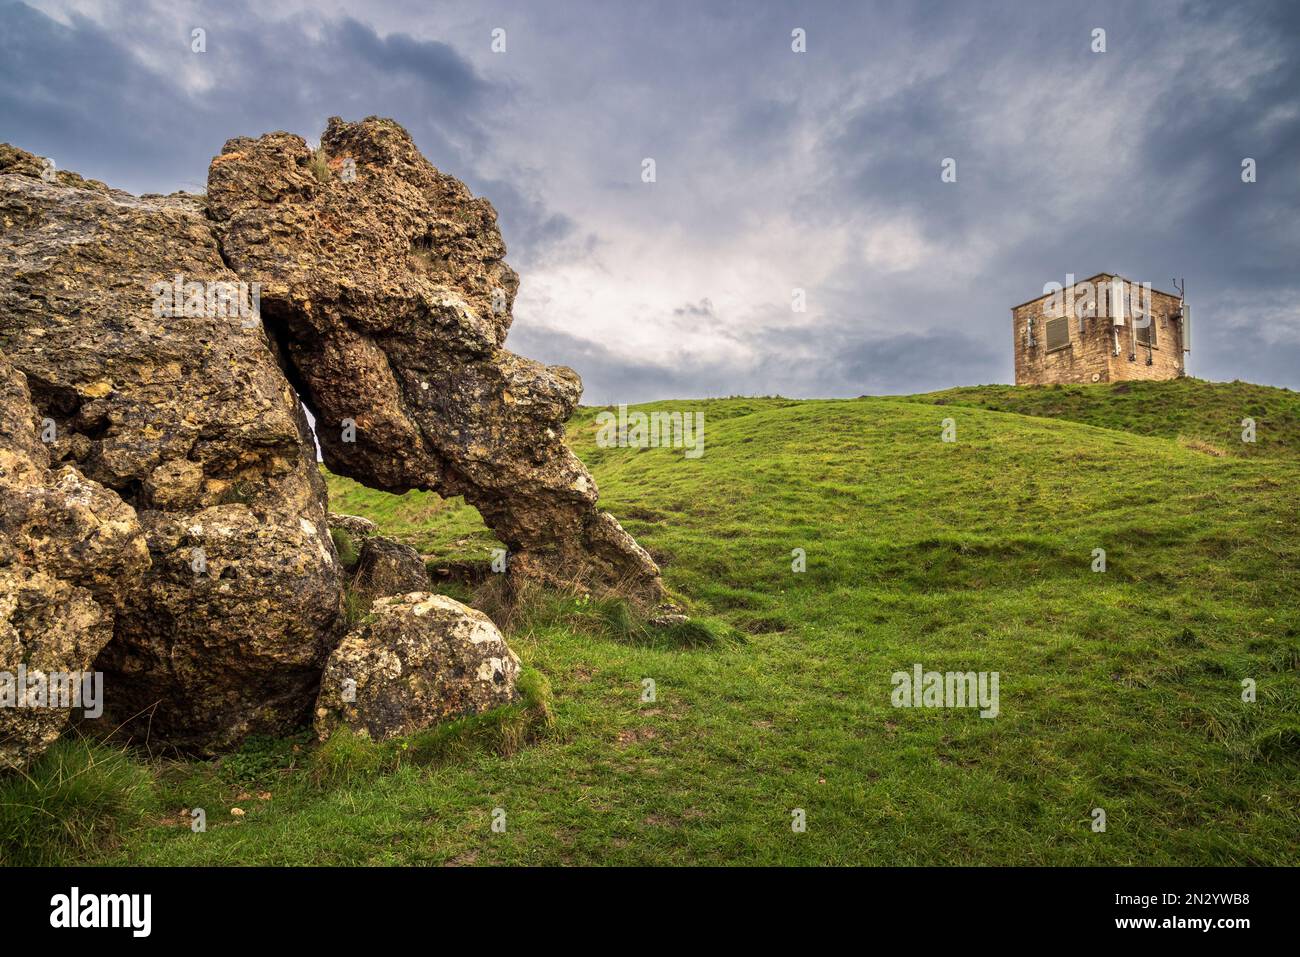 The Elephant Stone and Bredon Hill Tower, Cotswolds AONB, Worcestershire, Angleterre Banque D'Images